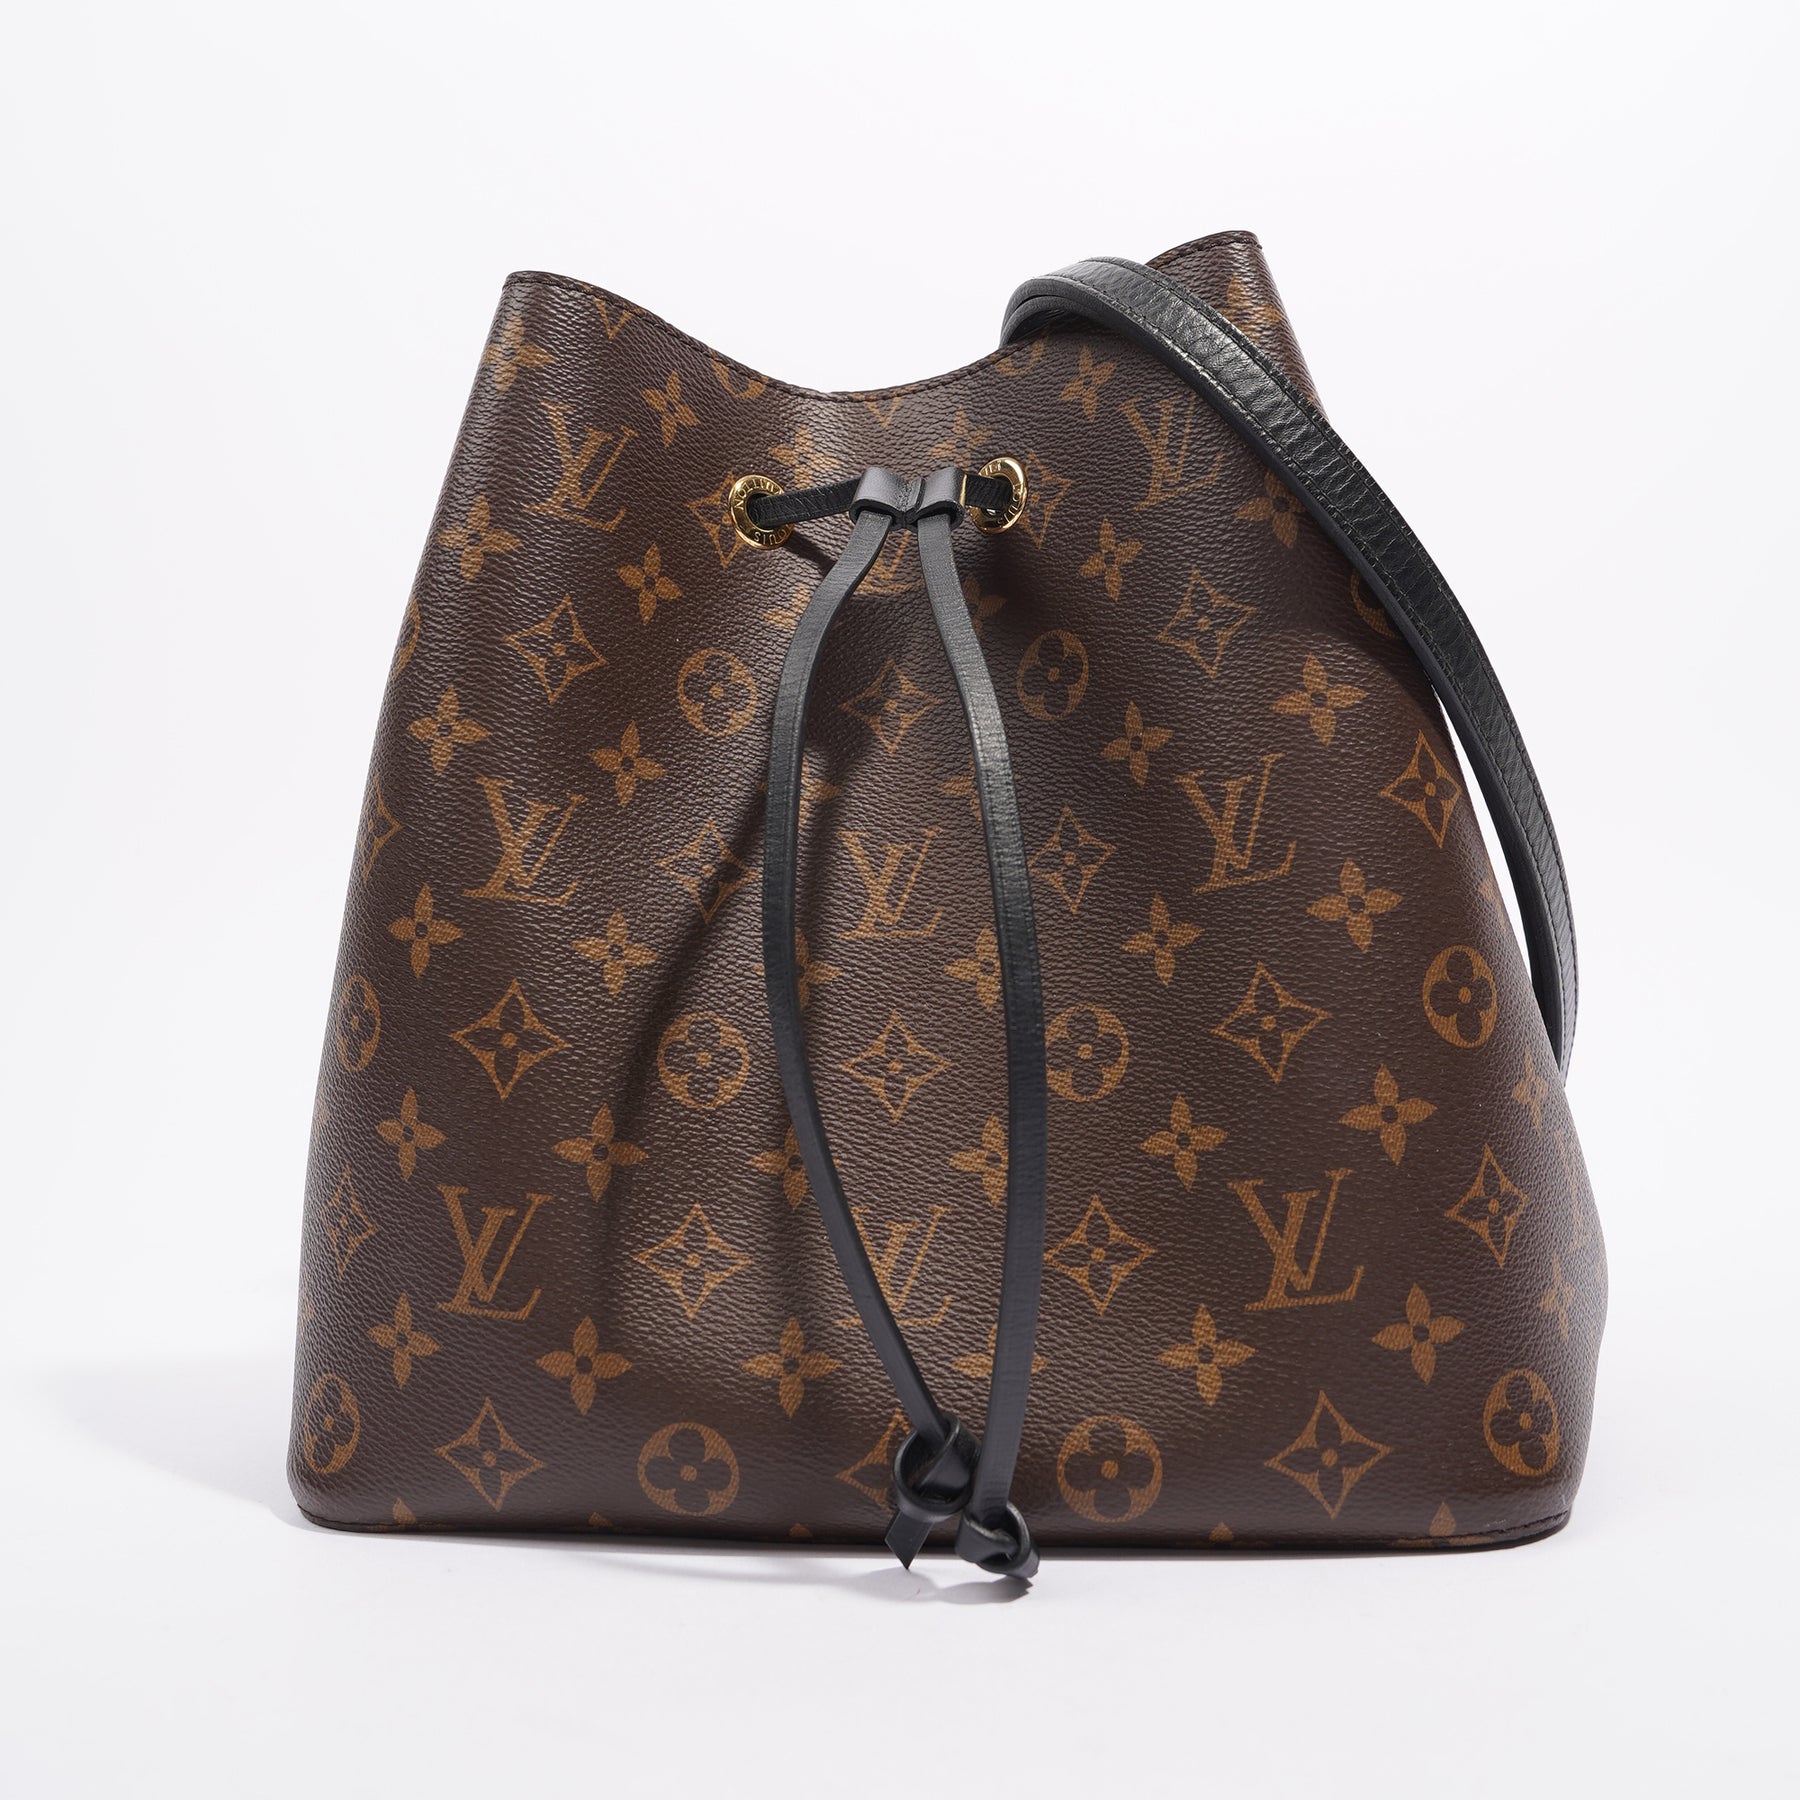 Men's Edit: Top 5 from Louis Vuitton - Academy by FASHIONPHILE